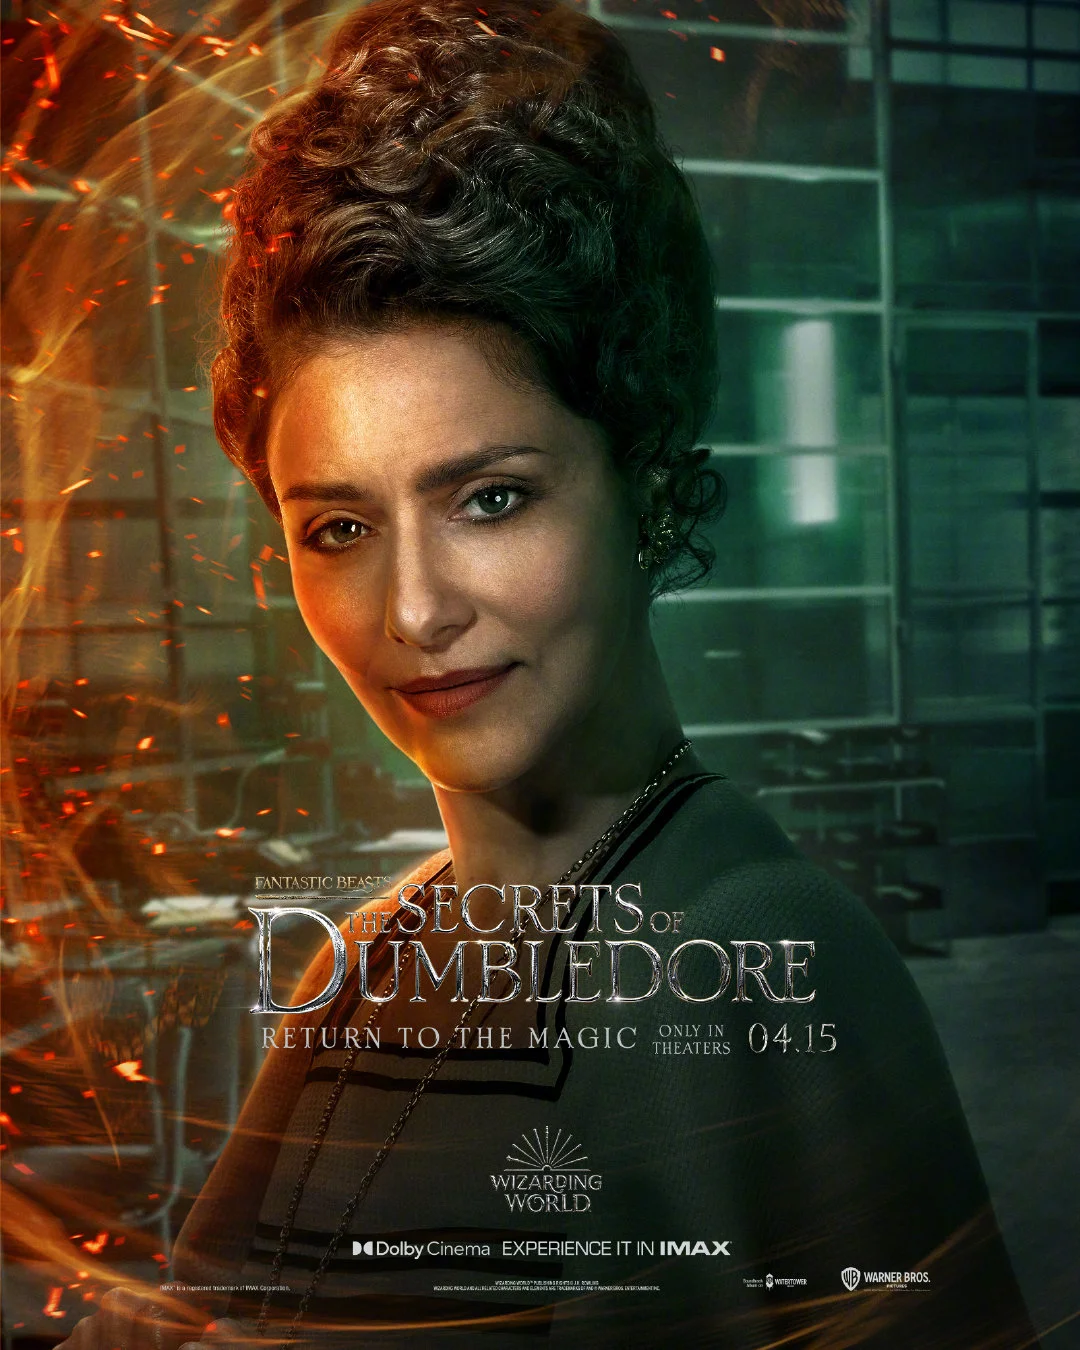 fantastic-beasts-the-secrets-of-dumbledore-releases-multiple-character-posters-17